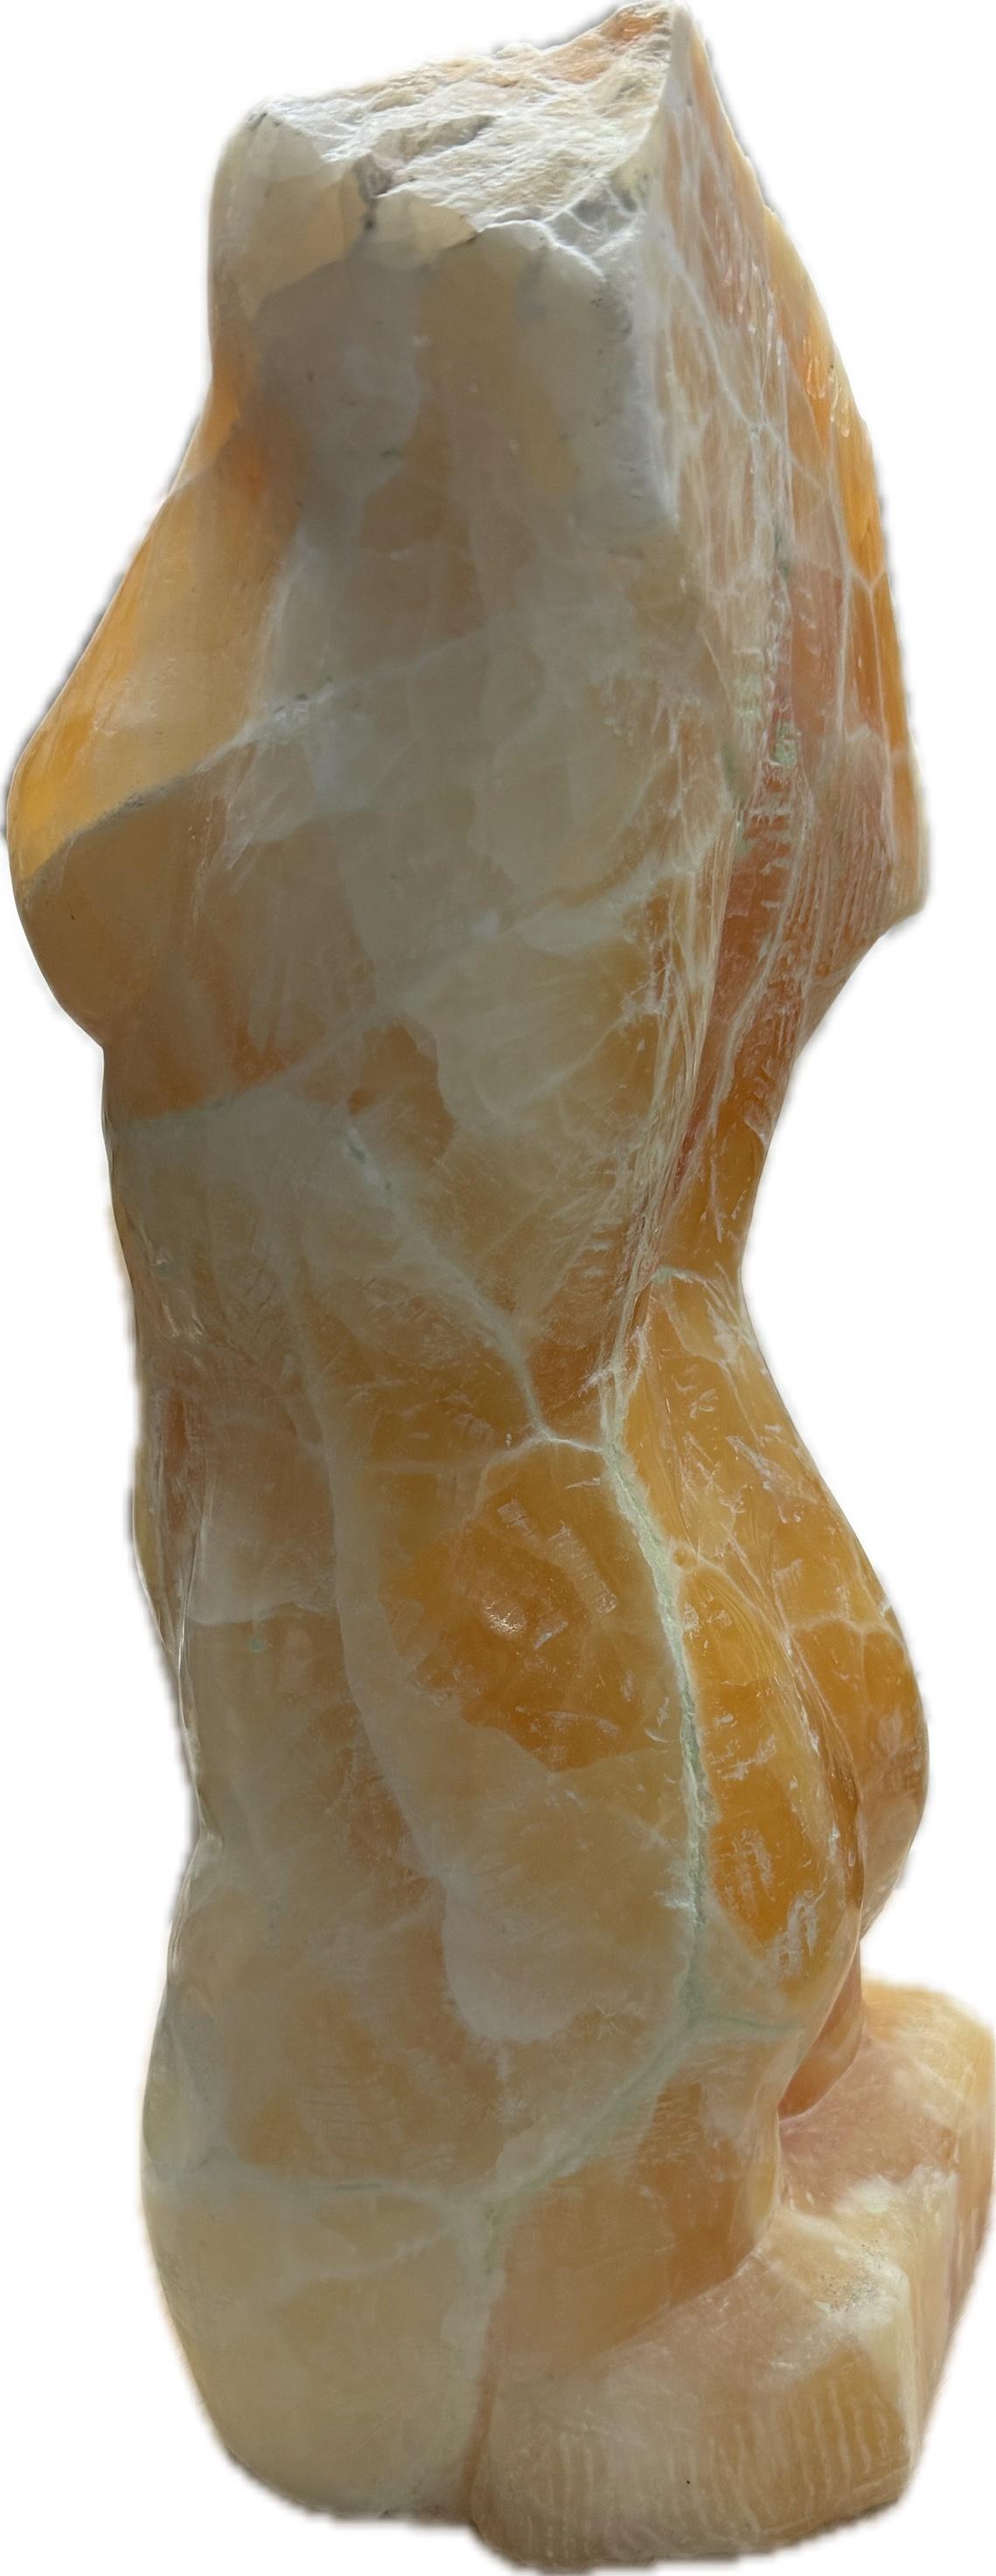 Nude, Sculpture, Natural Haney Onyx Stone, Handmade by Garo For Sale 6